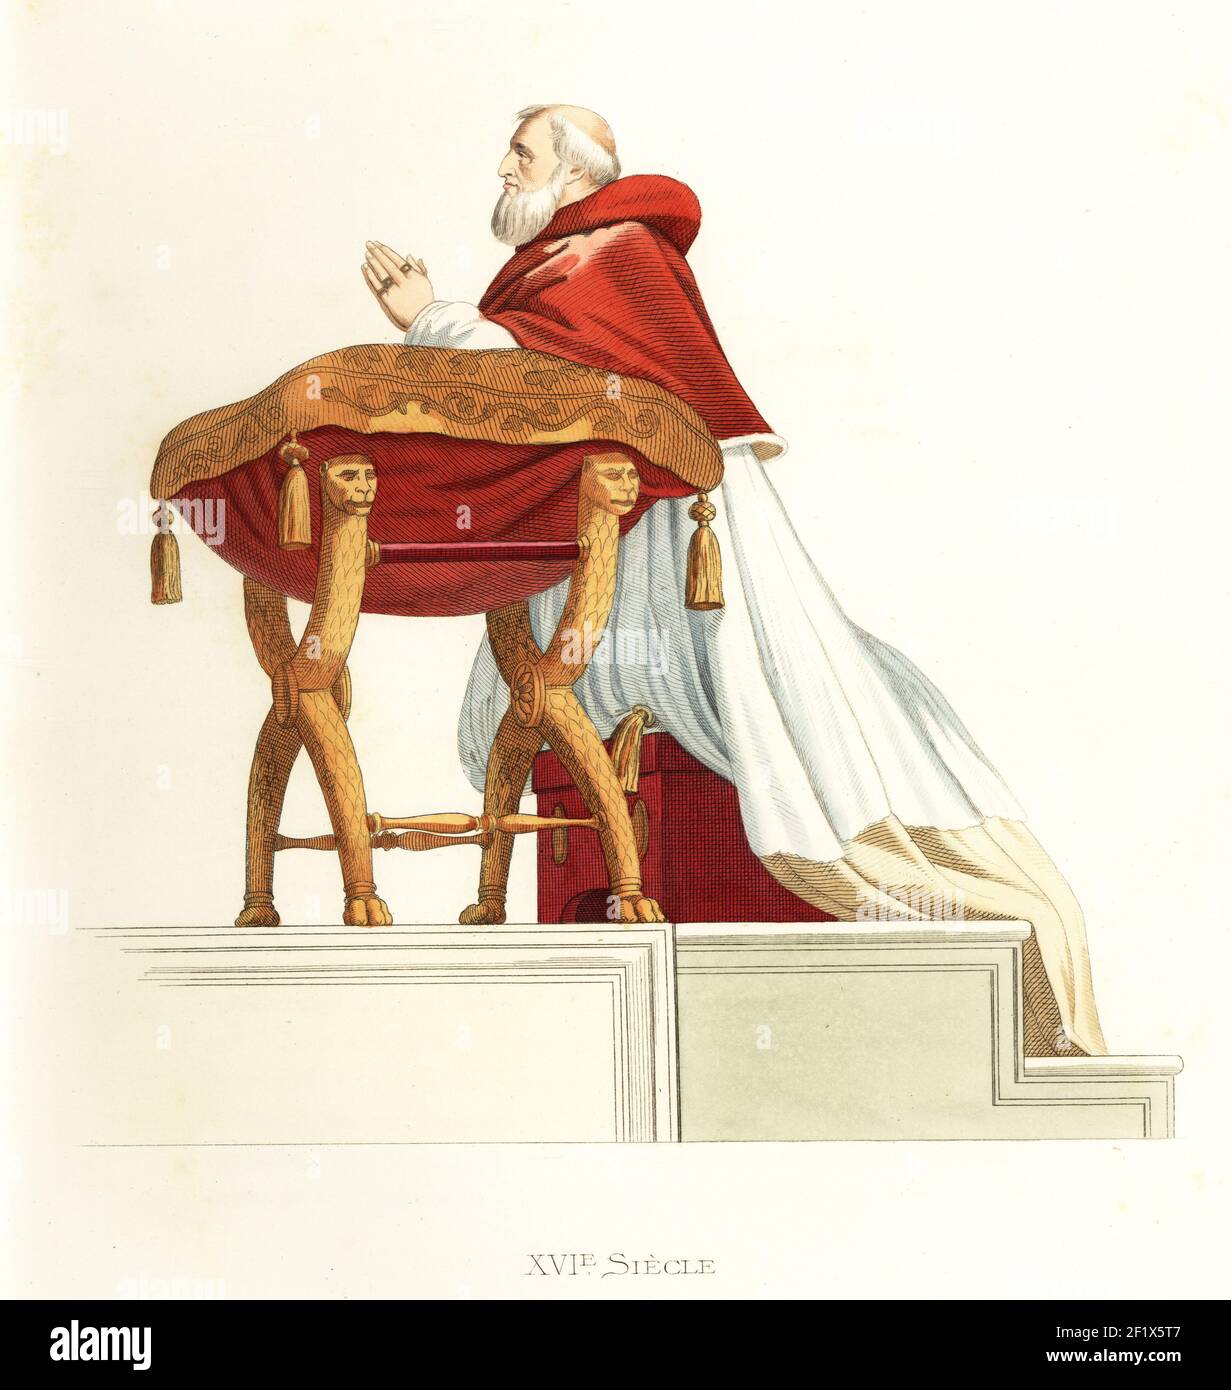 Pope Julius II kneeling in prayer, 16th century. Le Pape Jules II. After the painting by Raphael, Mass at Bolsene, La Messe de Bolsene, 1512. Handcolored lithograph after an illustration by Edmond Lechevallier-Chevignard from Georges Duplessis's Costumes historiques des XVIe, XVIIe et XVIIIe siecles (Historical costumes of the 16th, 17th and 18th centuries), Paris, 1867. Edmond Lechevallier-Chevignard was an artist, book illustrator, and interior designer. Stock Photo